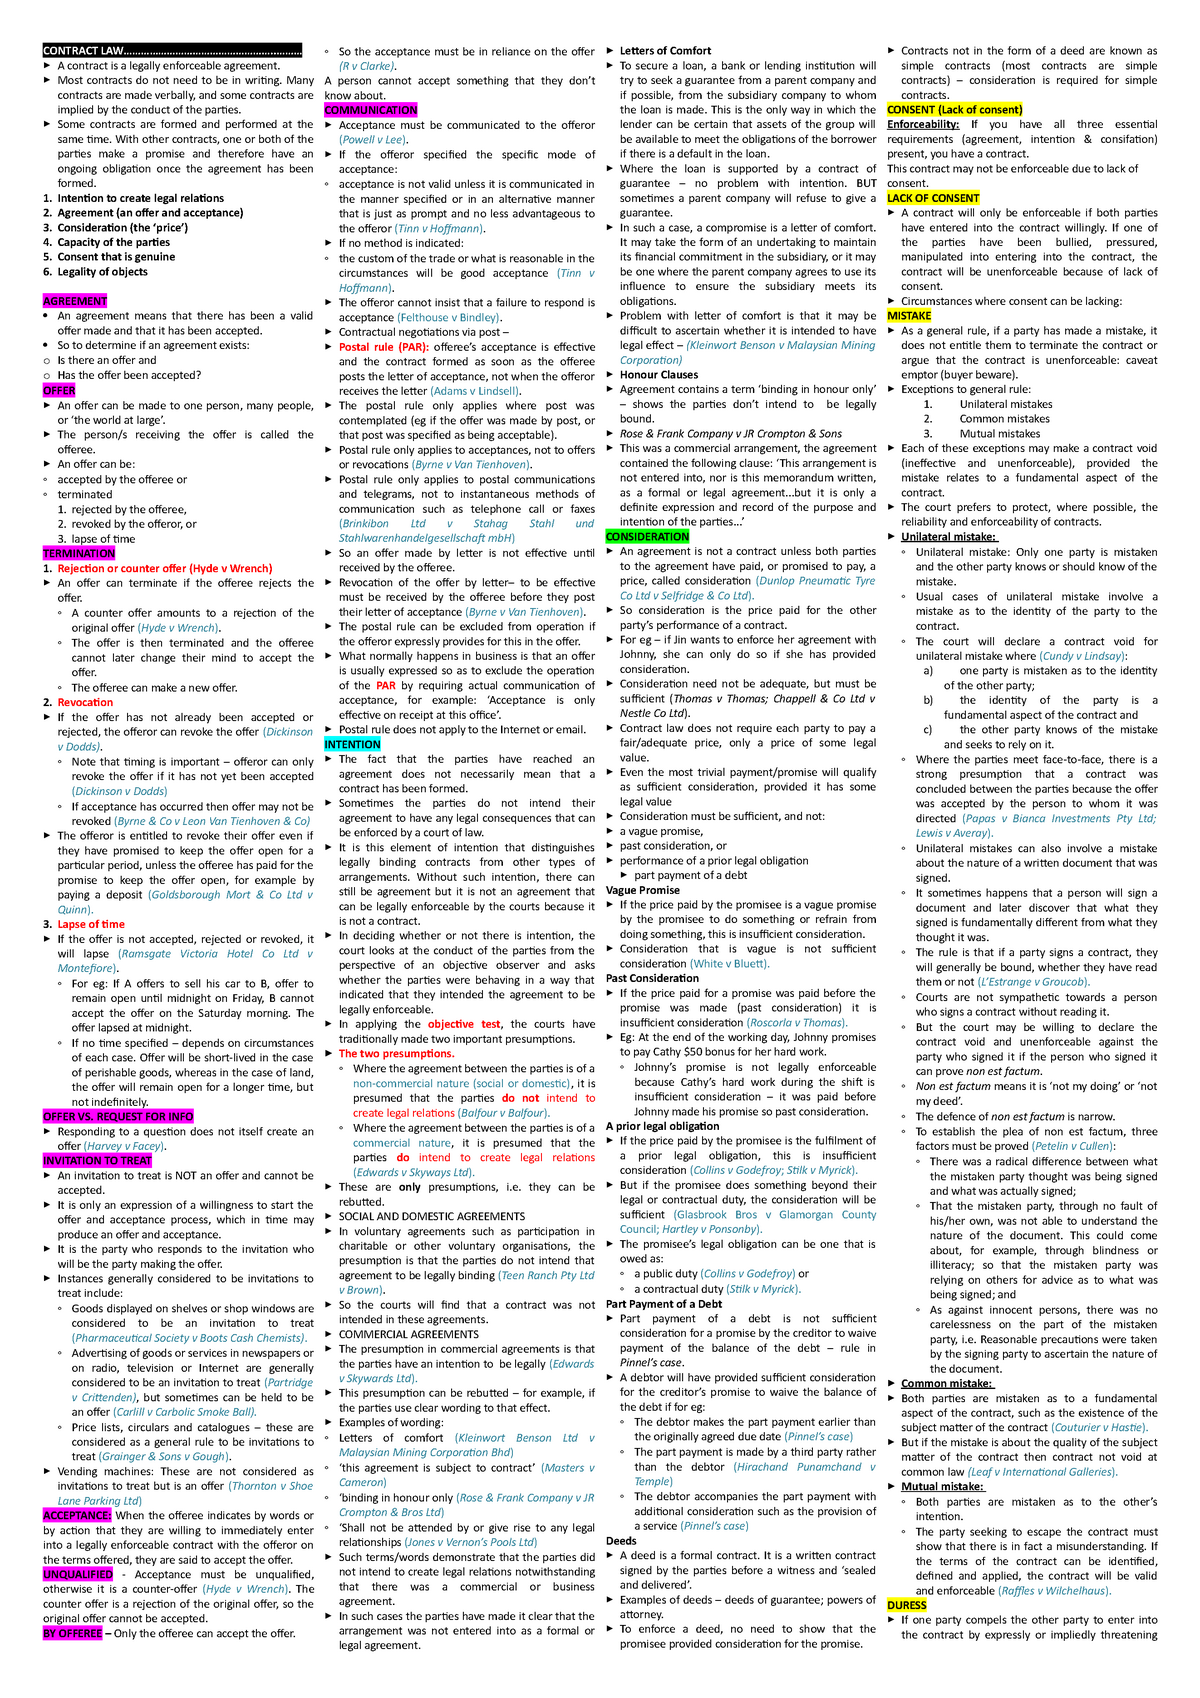 Cheat sheet final exam CONTRACT LAW